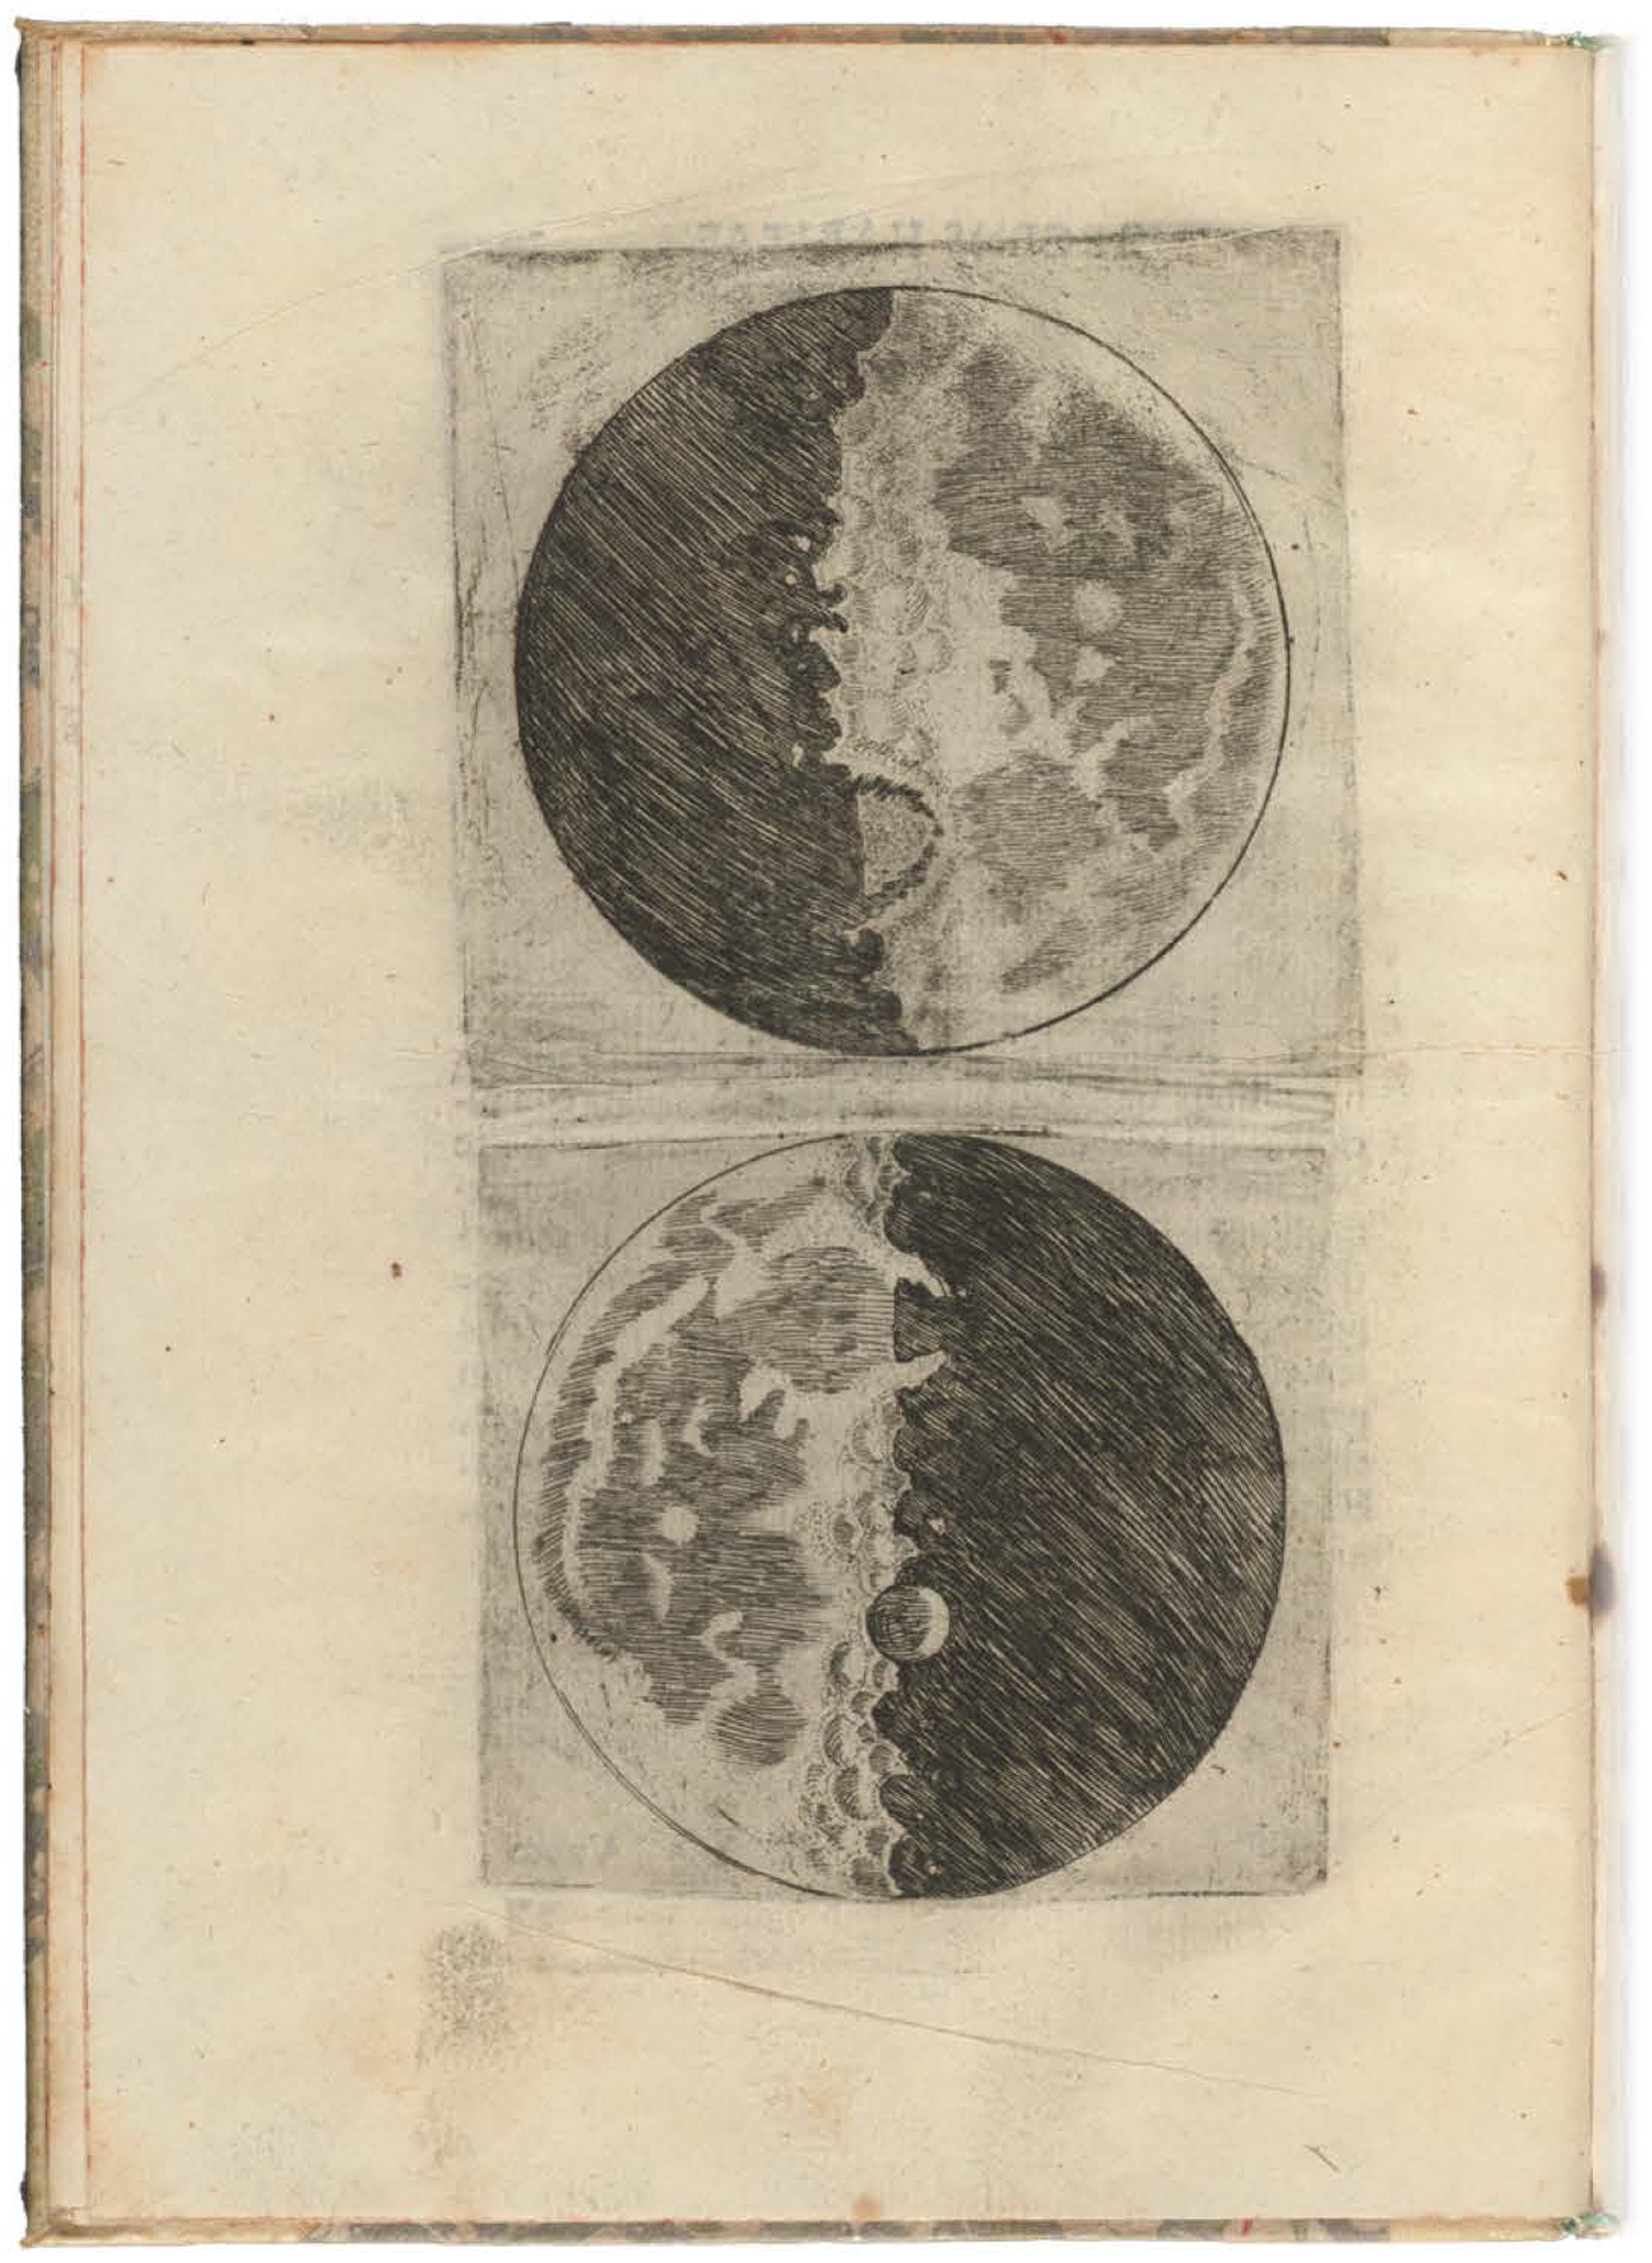 Page from Galileo’s “Siderius Nuncius” shows first images of the moon as observed through a telescope.